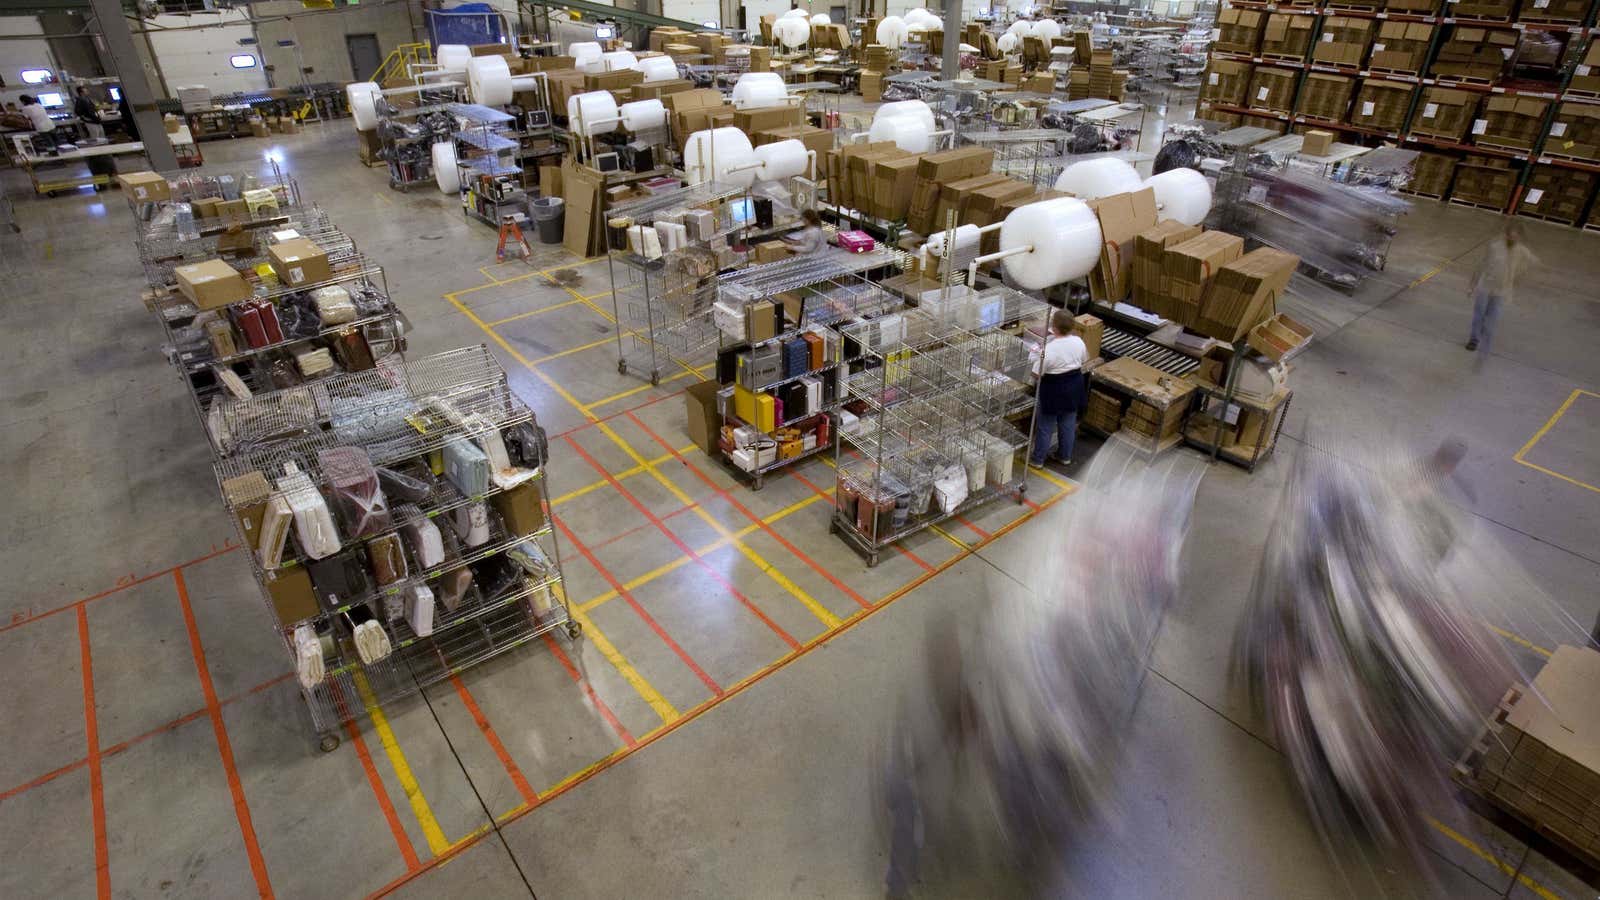 Delivering the e-commerce goods